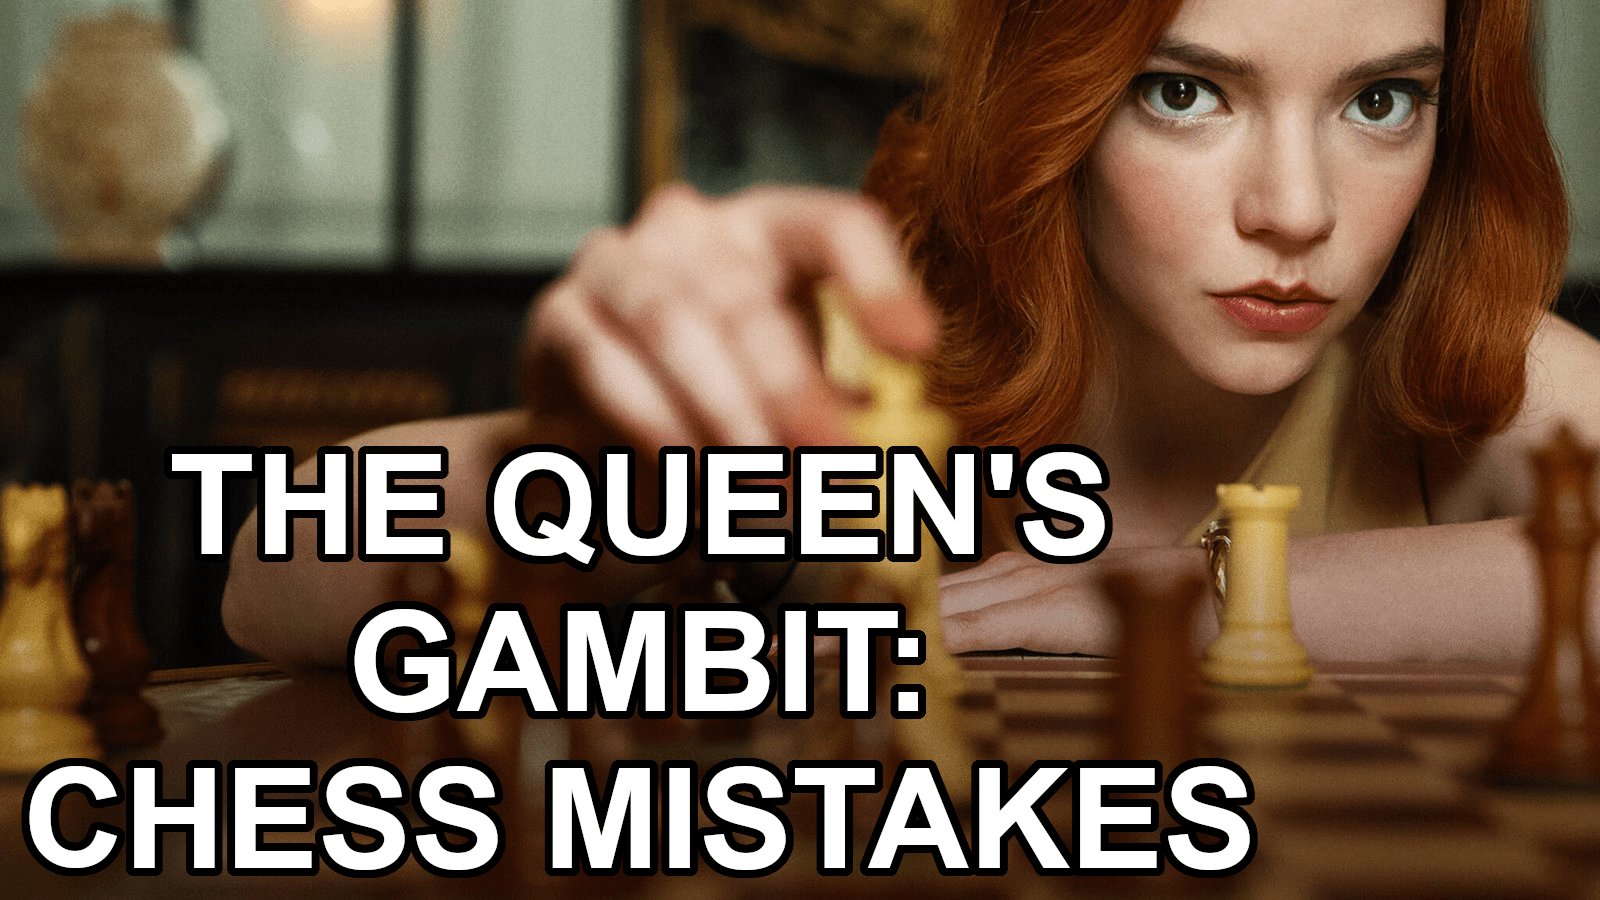 These 7 Pivotal Chess Games in The Queen's Gambit Really Happened